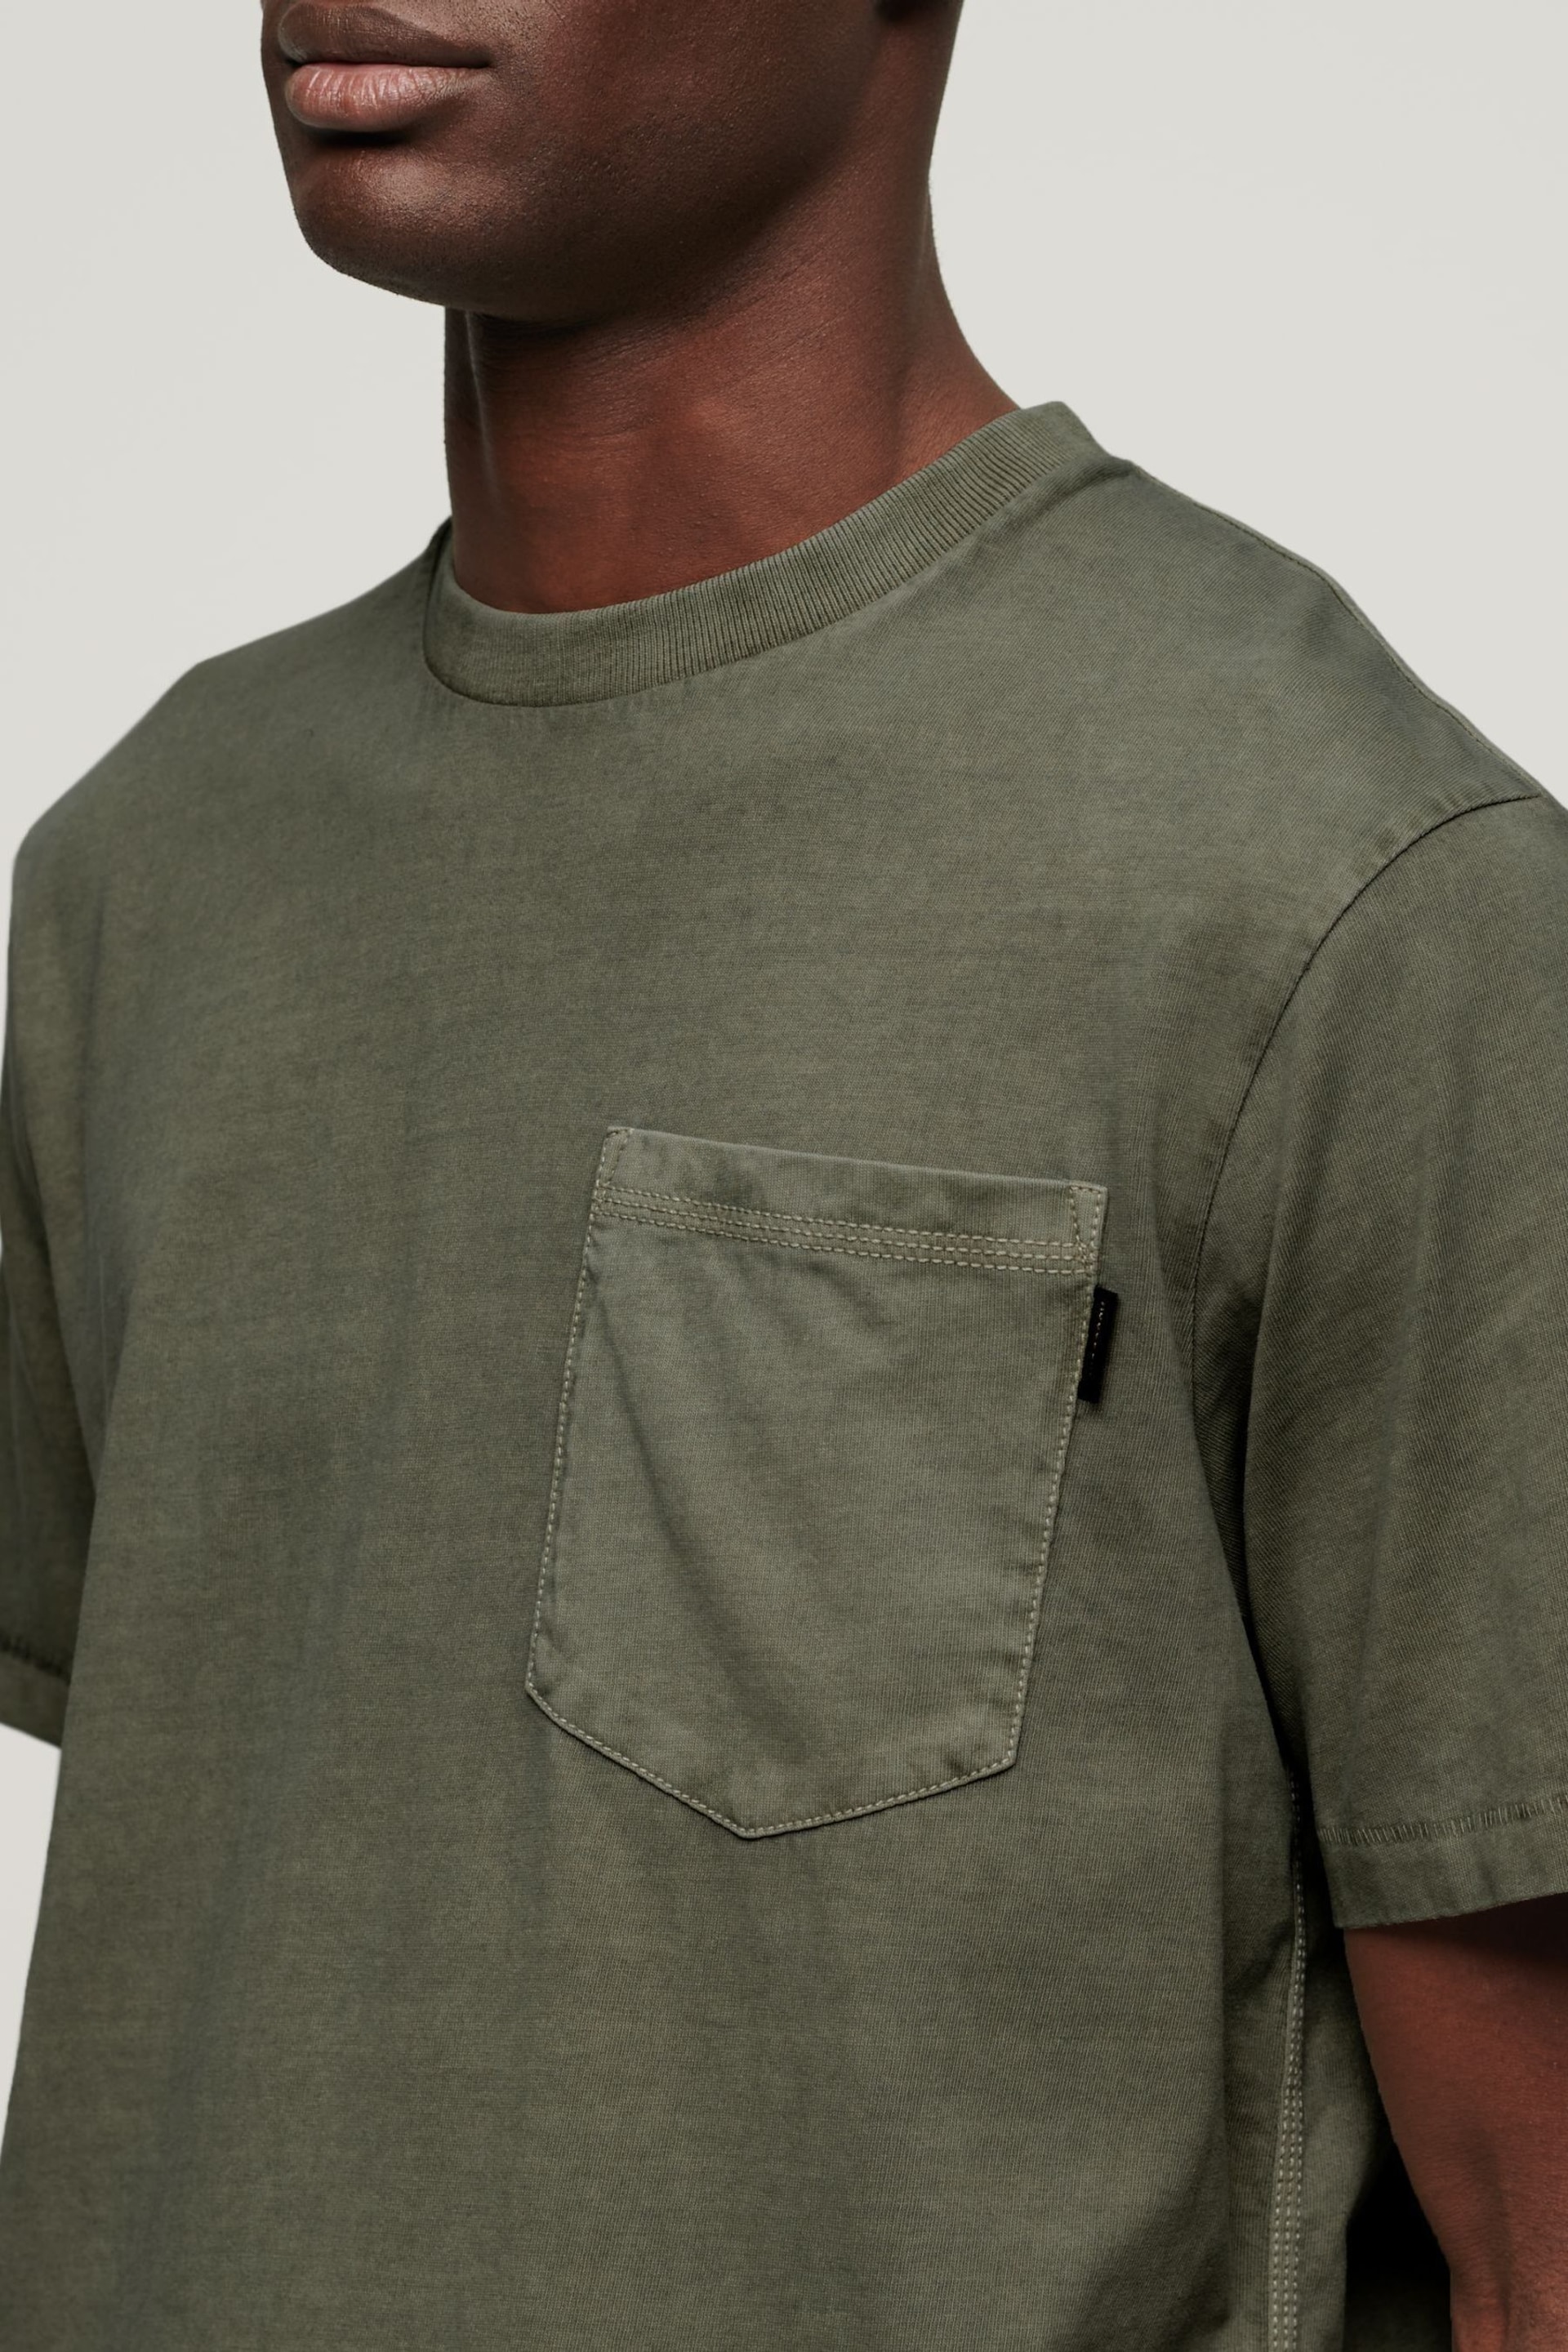 Superdry Green Contrast Stitch Pocket T-Shirt - Image 3 of 6